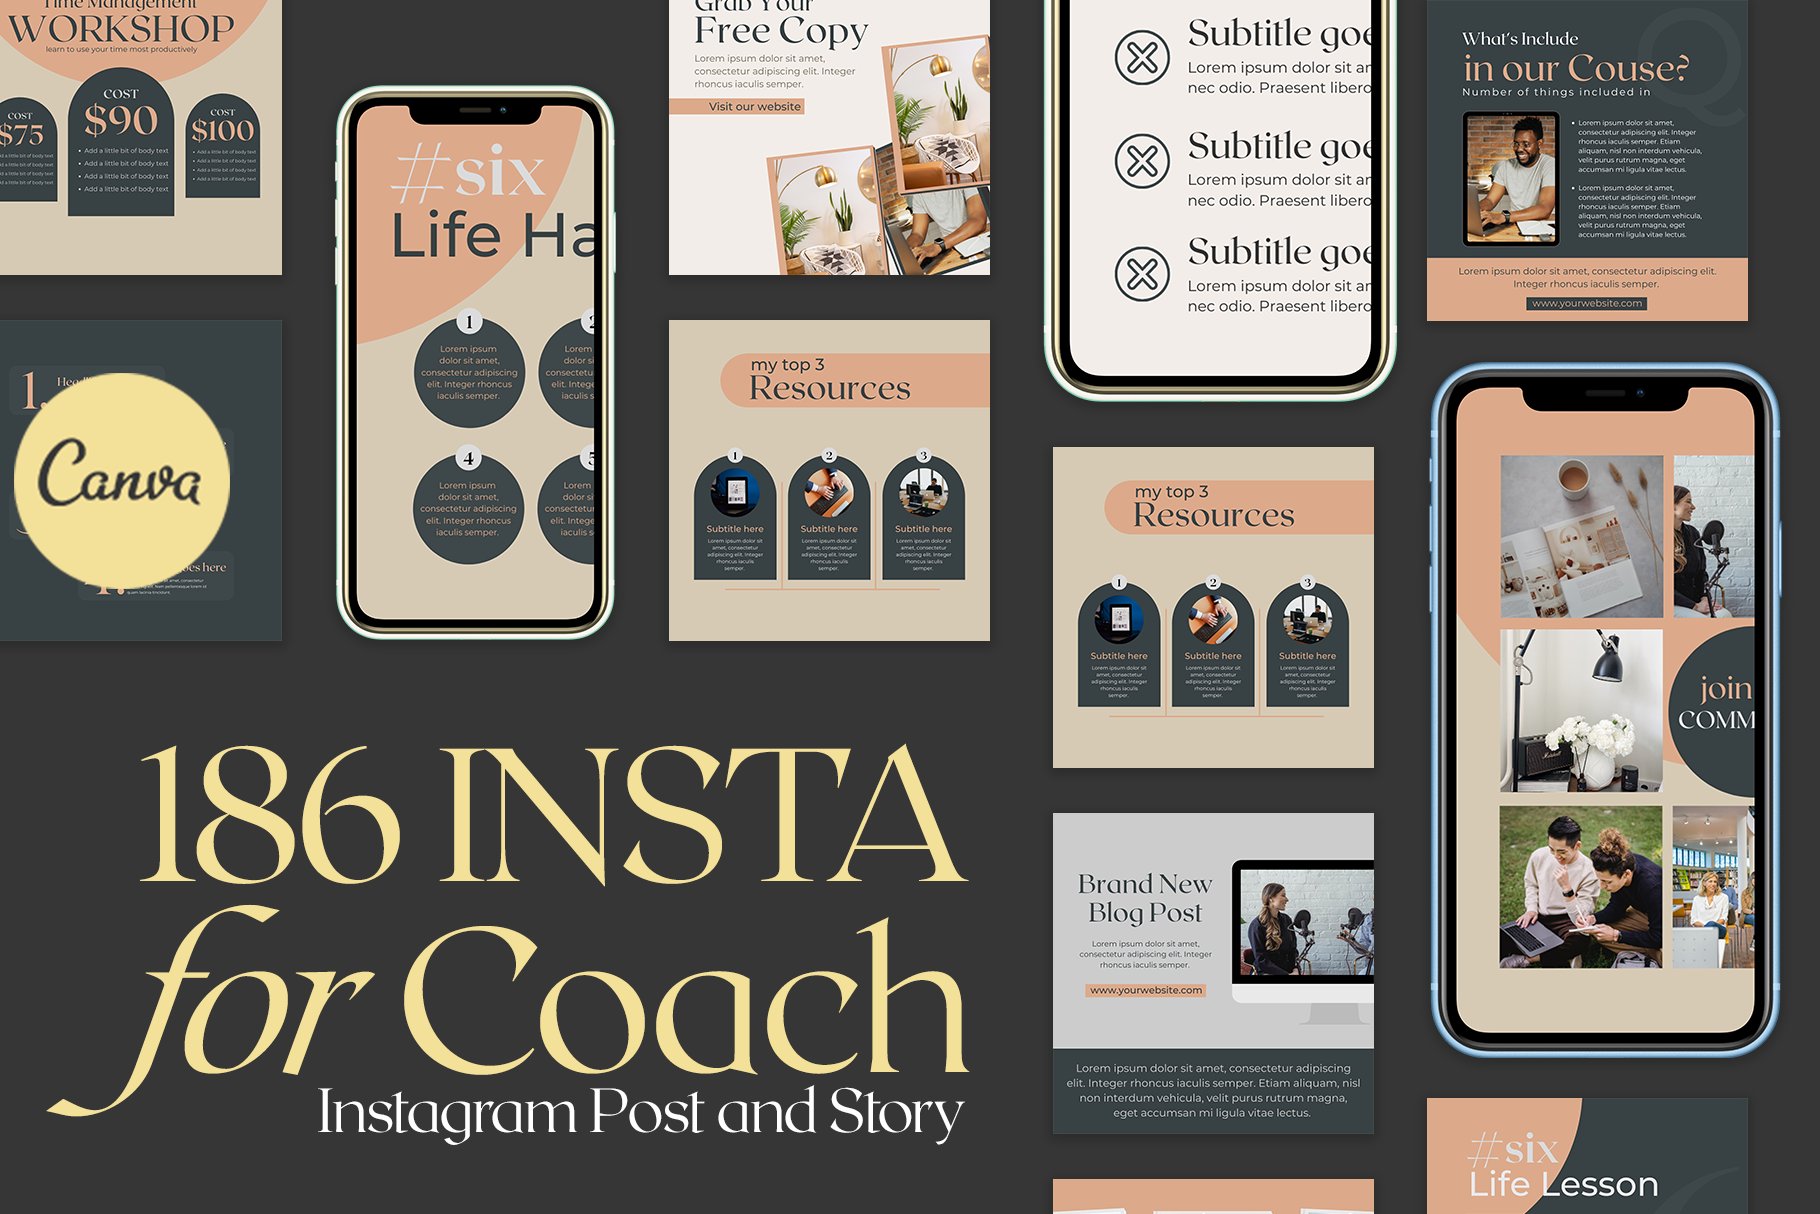 Cover image of Instagram Creator For Coach CANVA.